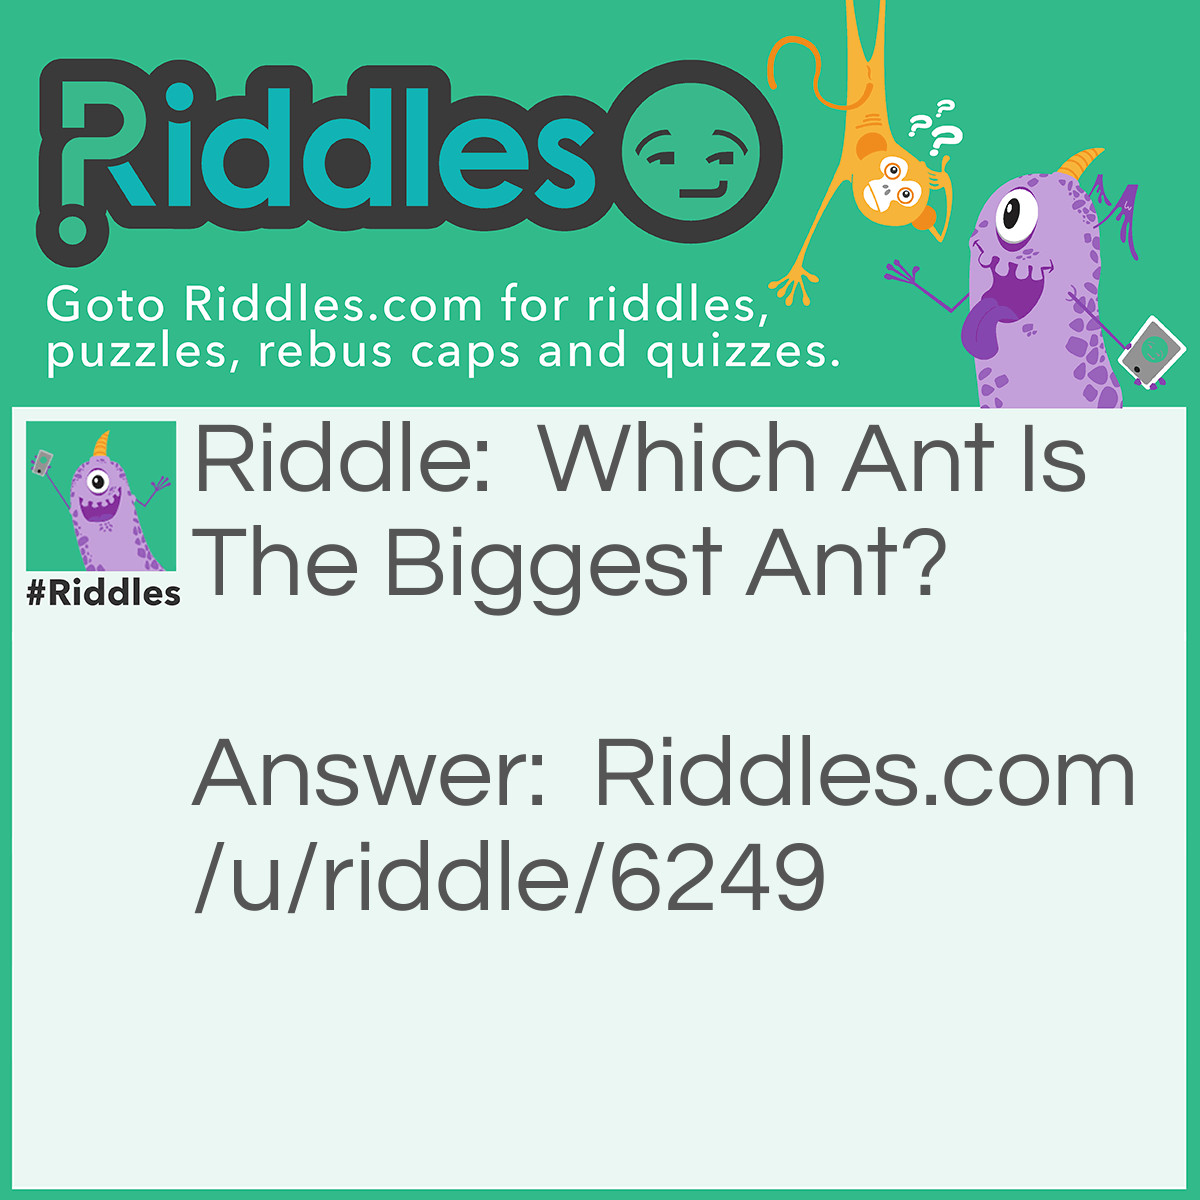 Riddle: Which Ant Is The Biggest Ant? Answer: Elephant.